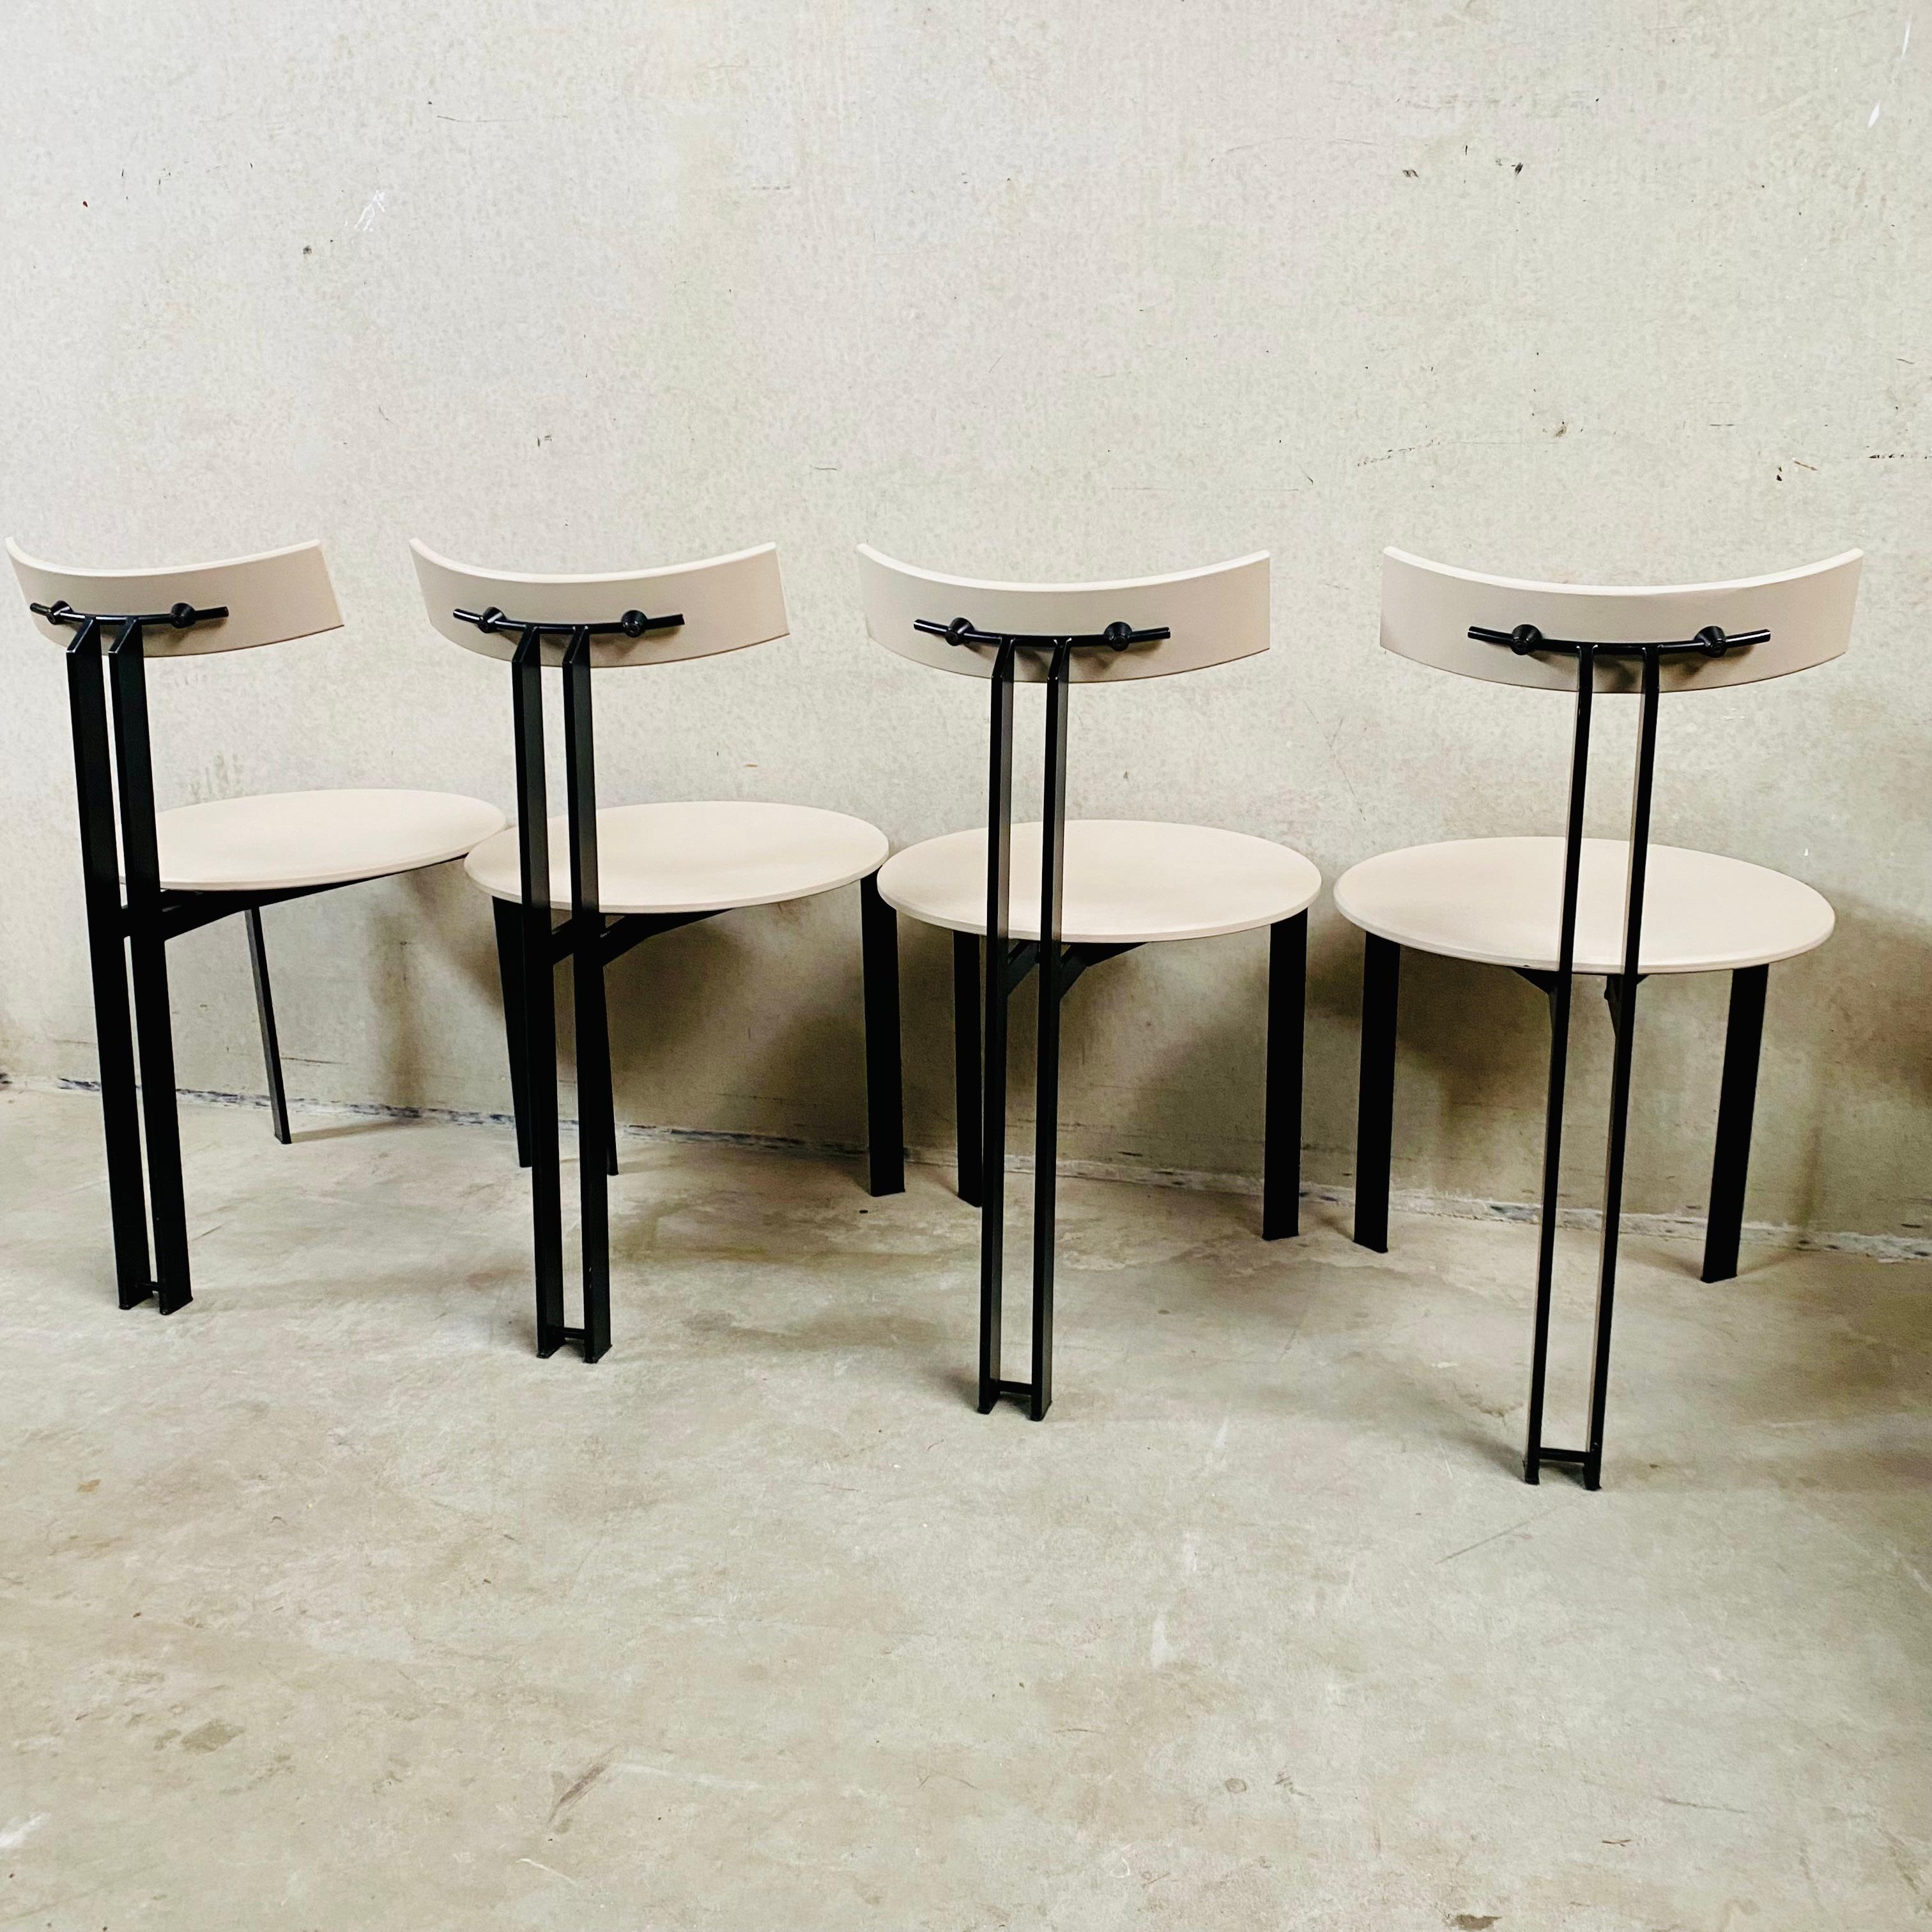 4 x Brutalist ZETA Dining Chairs by Martin Haksteen for Harvink, Netherlands  For Sale 2